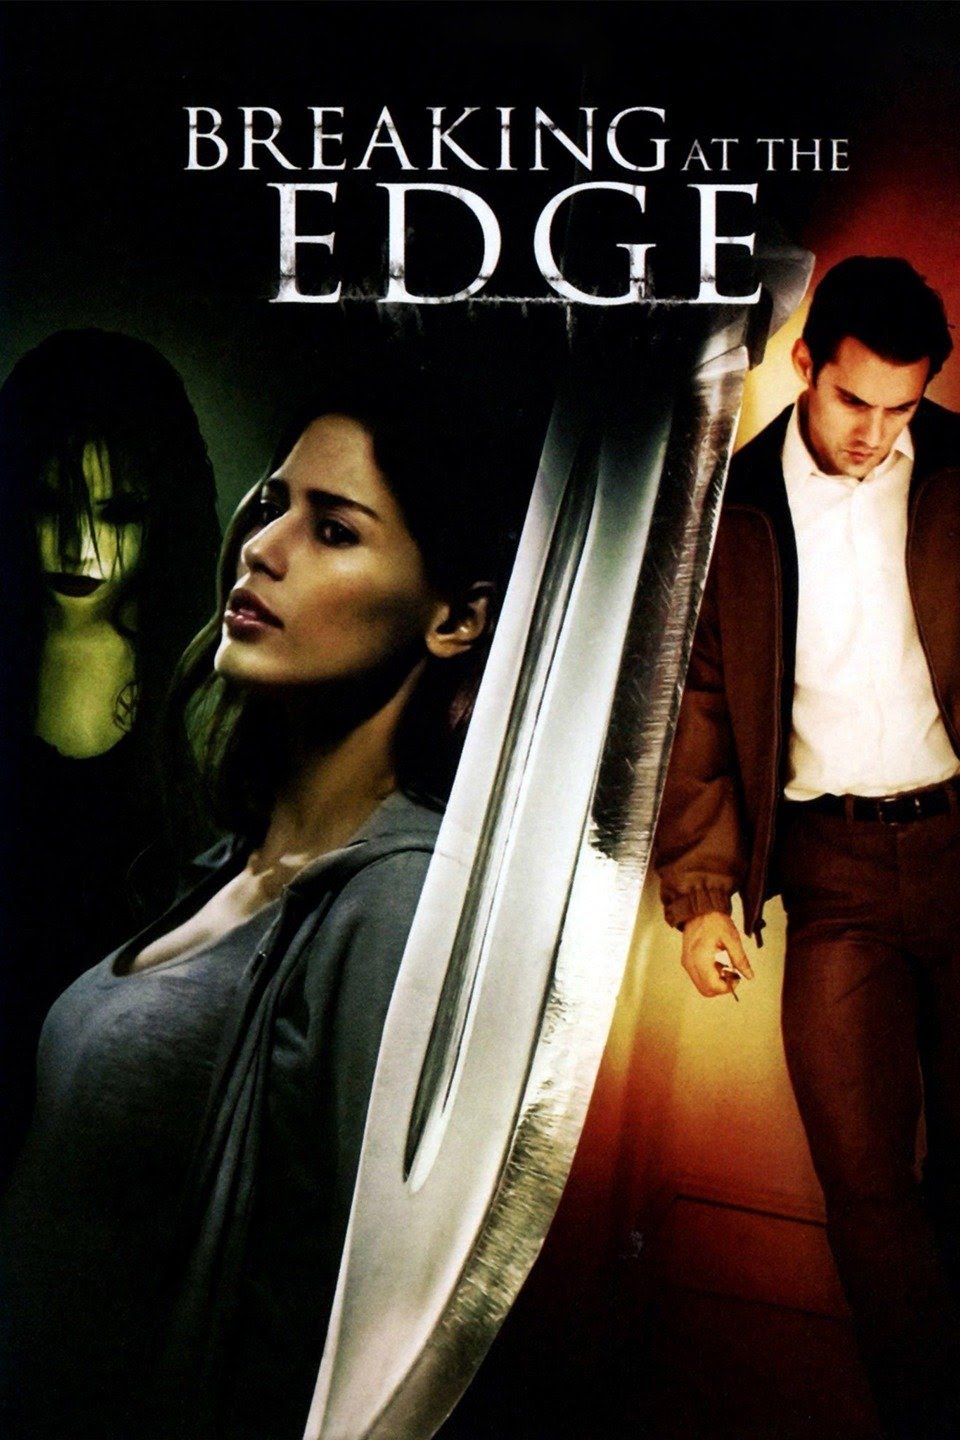 Breaking at the edge [HD] (2013)